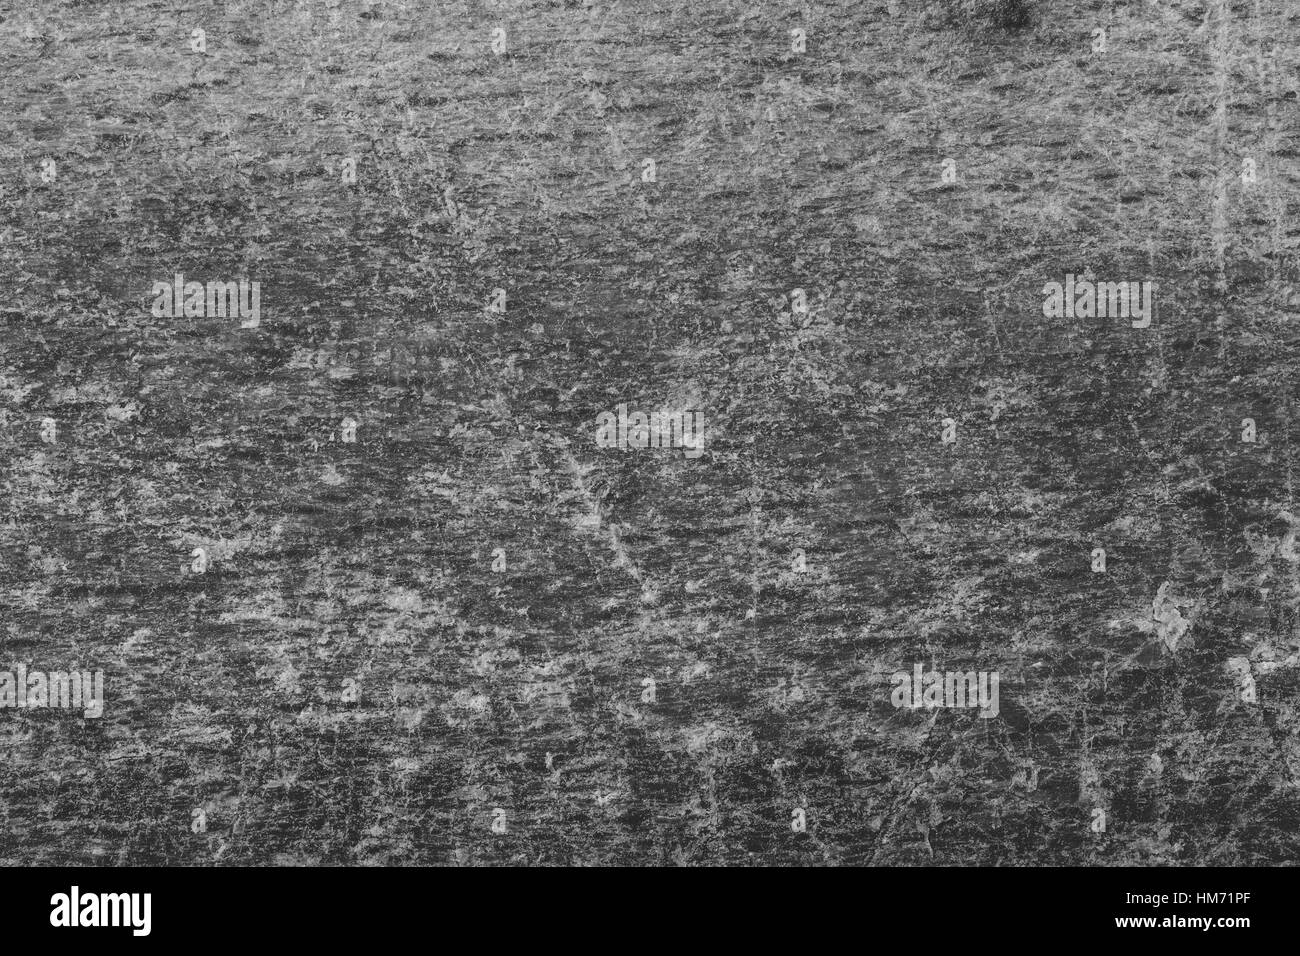 Grunge surface with grain and scratches in black and white with place for text. Stock Photo